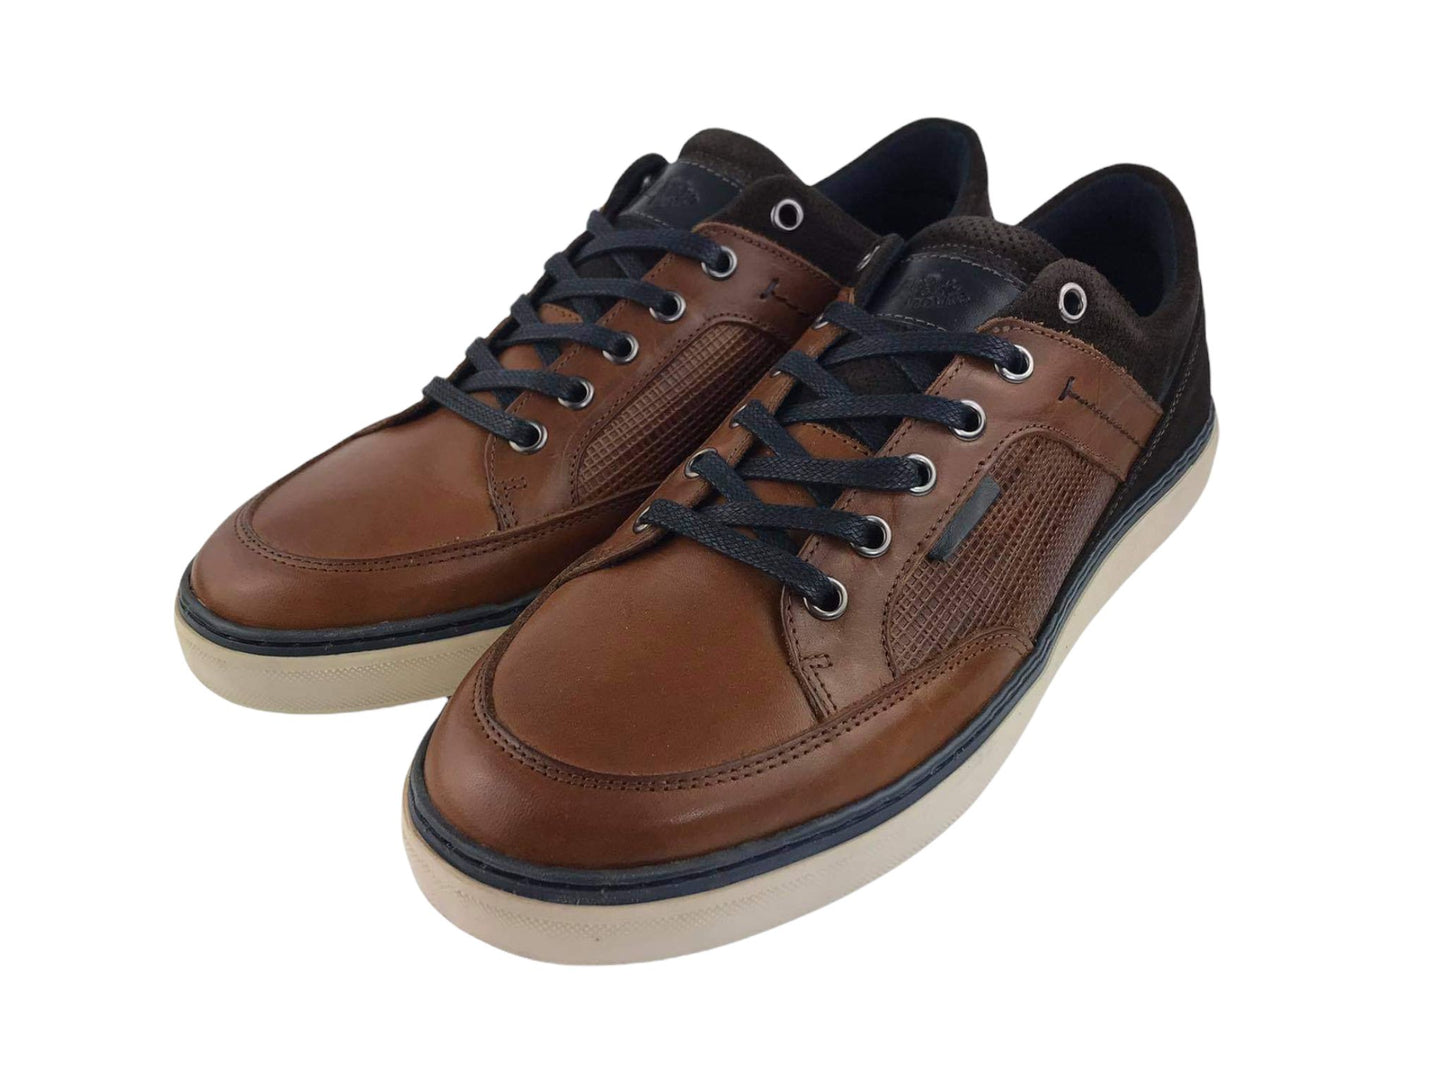 48Hours | Street sneakers with laces in caramel colored leather Belize